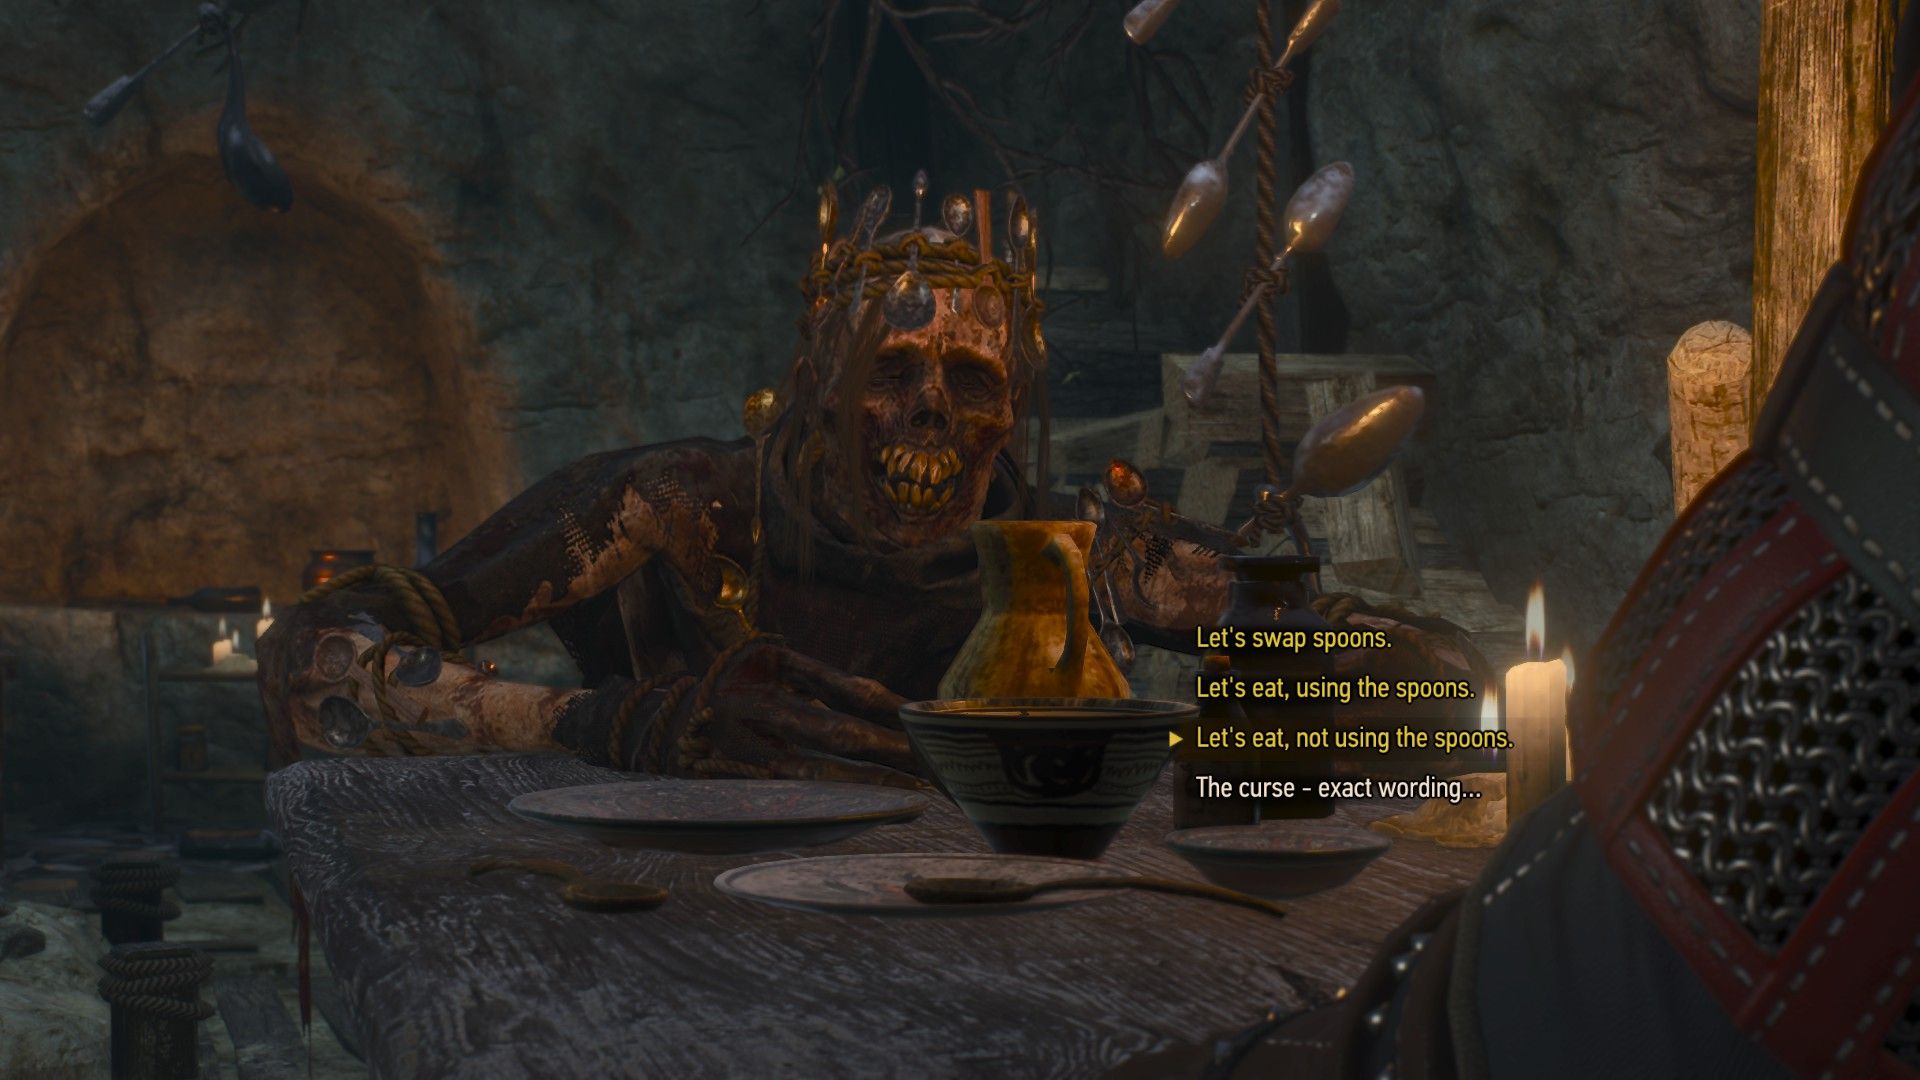 Screenshot from The Witcher 3 showing dialogue options to help a wight.